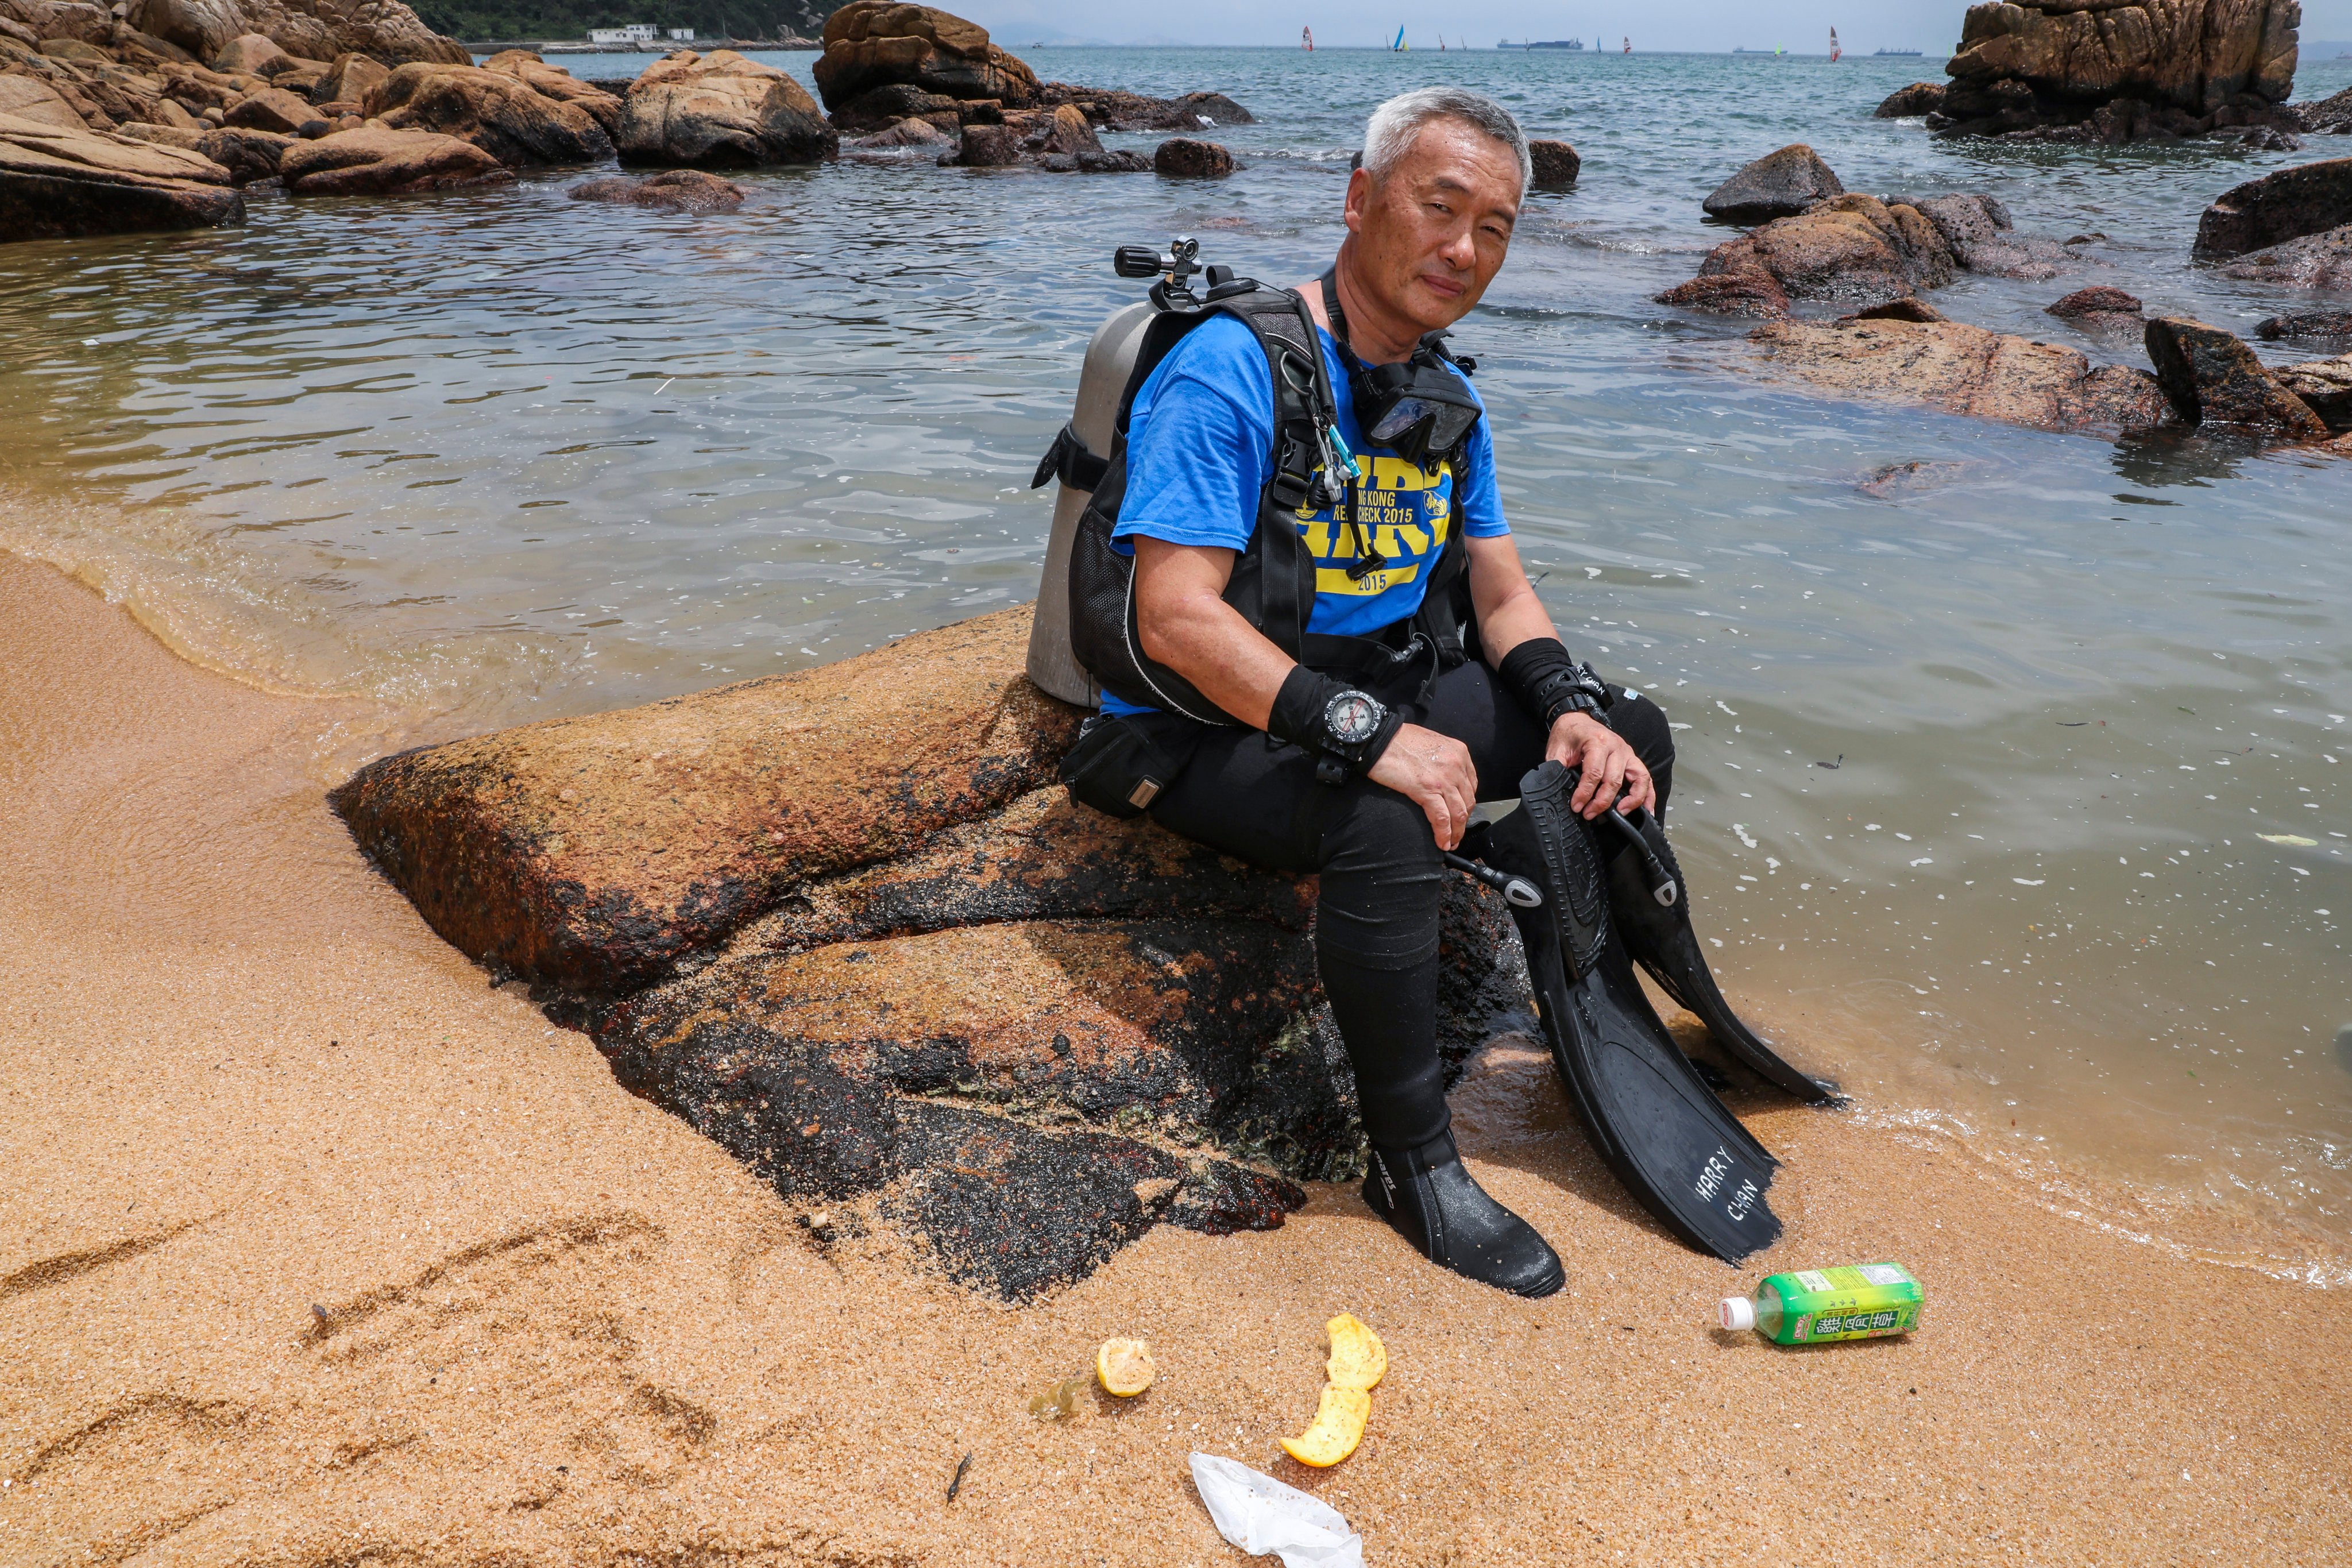 Harry Chan, “Hong Kong’s ghost net hunter”, talks about nearly being sold as a baby, why he tried to get expelled, how his business bloomed and then went bust, and finally finding peace under water. Photo: K. Y. Cheng